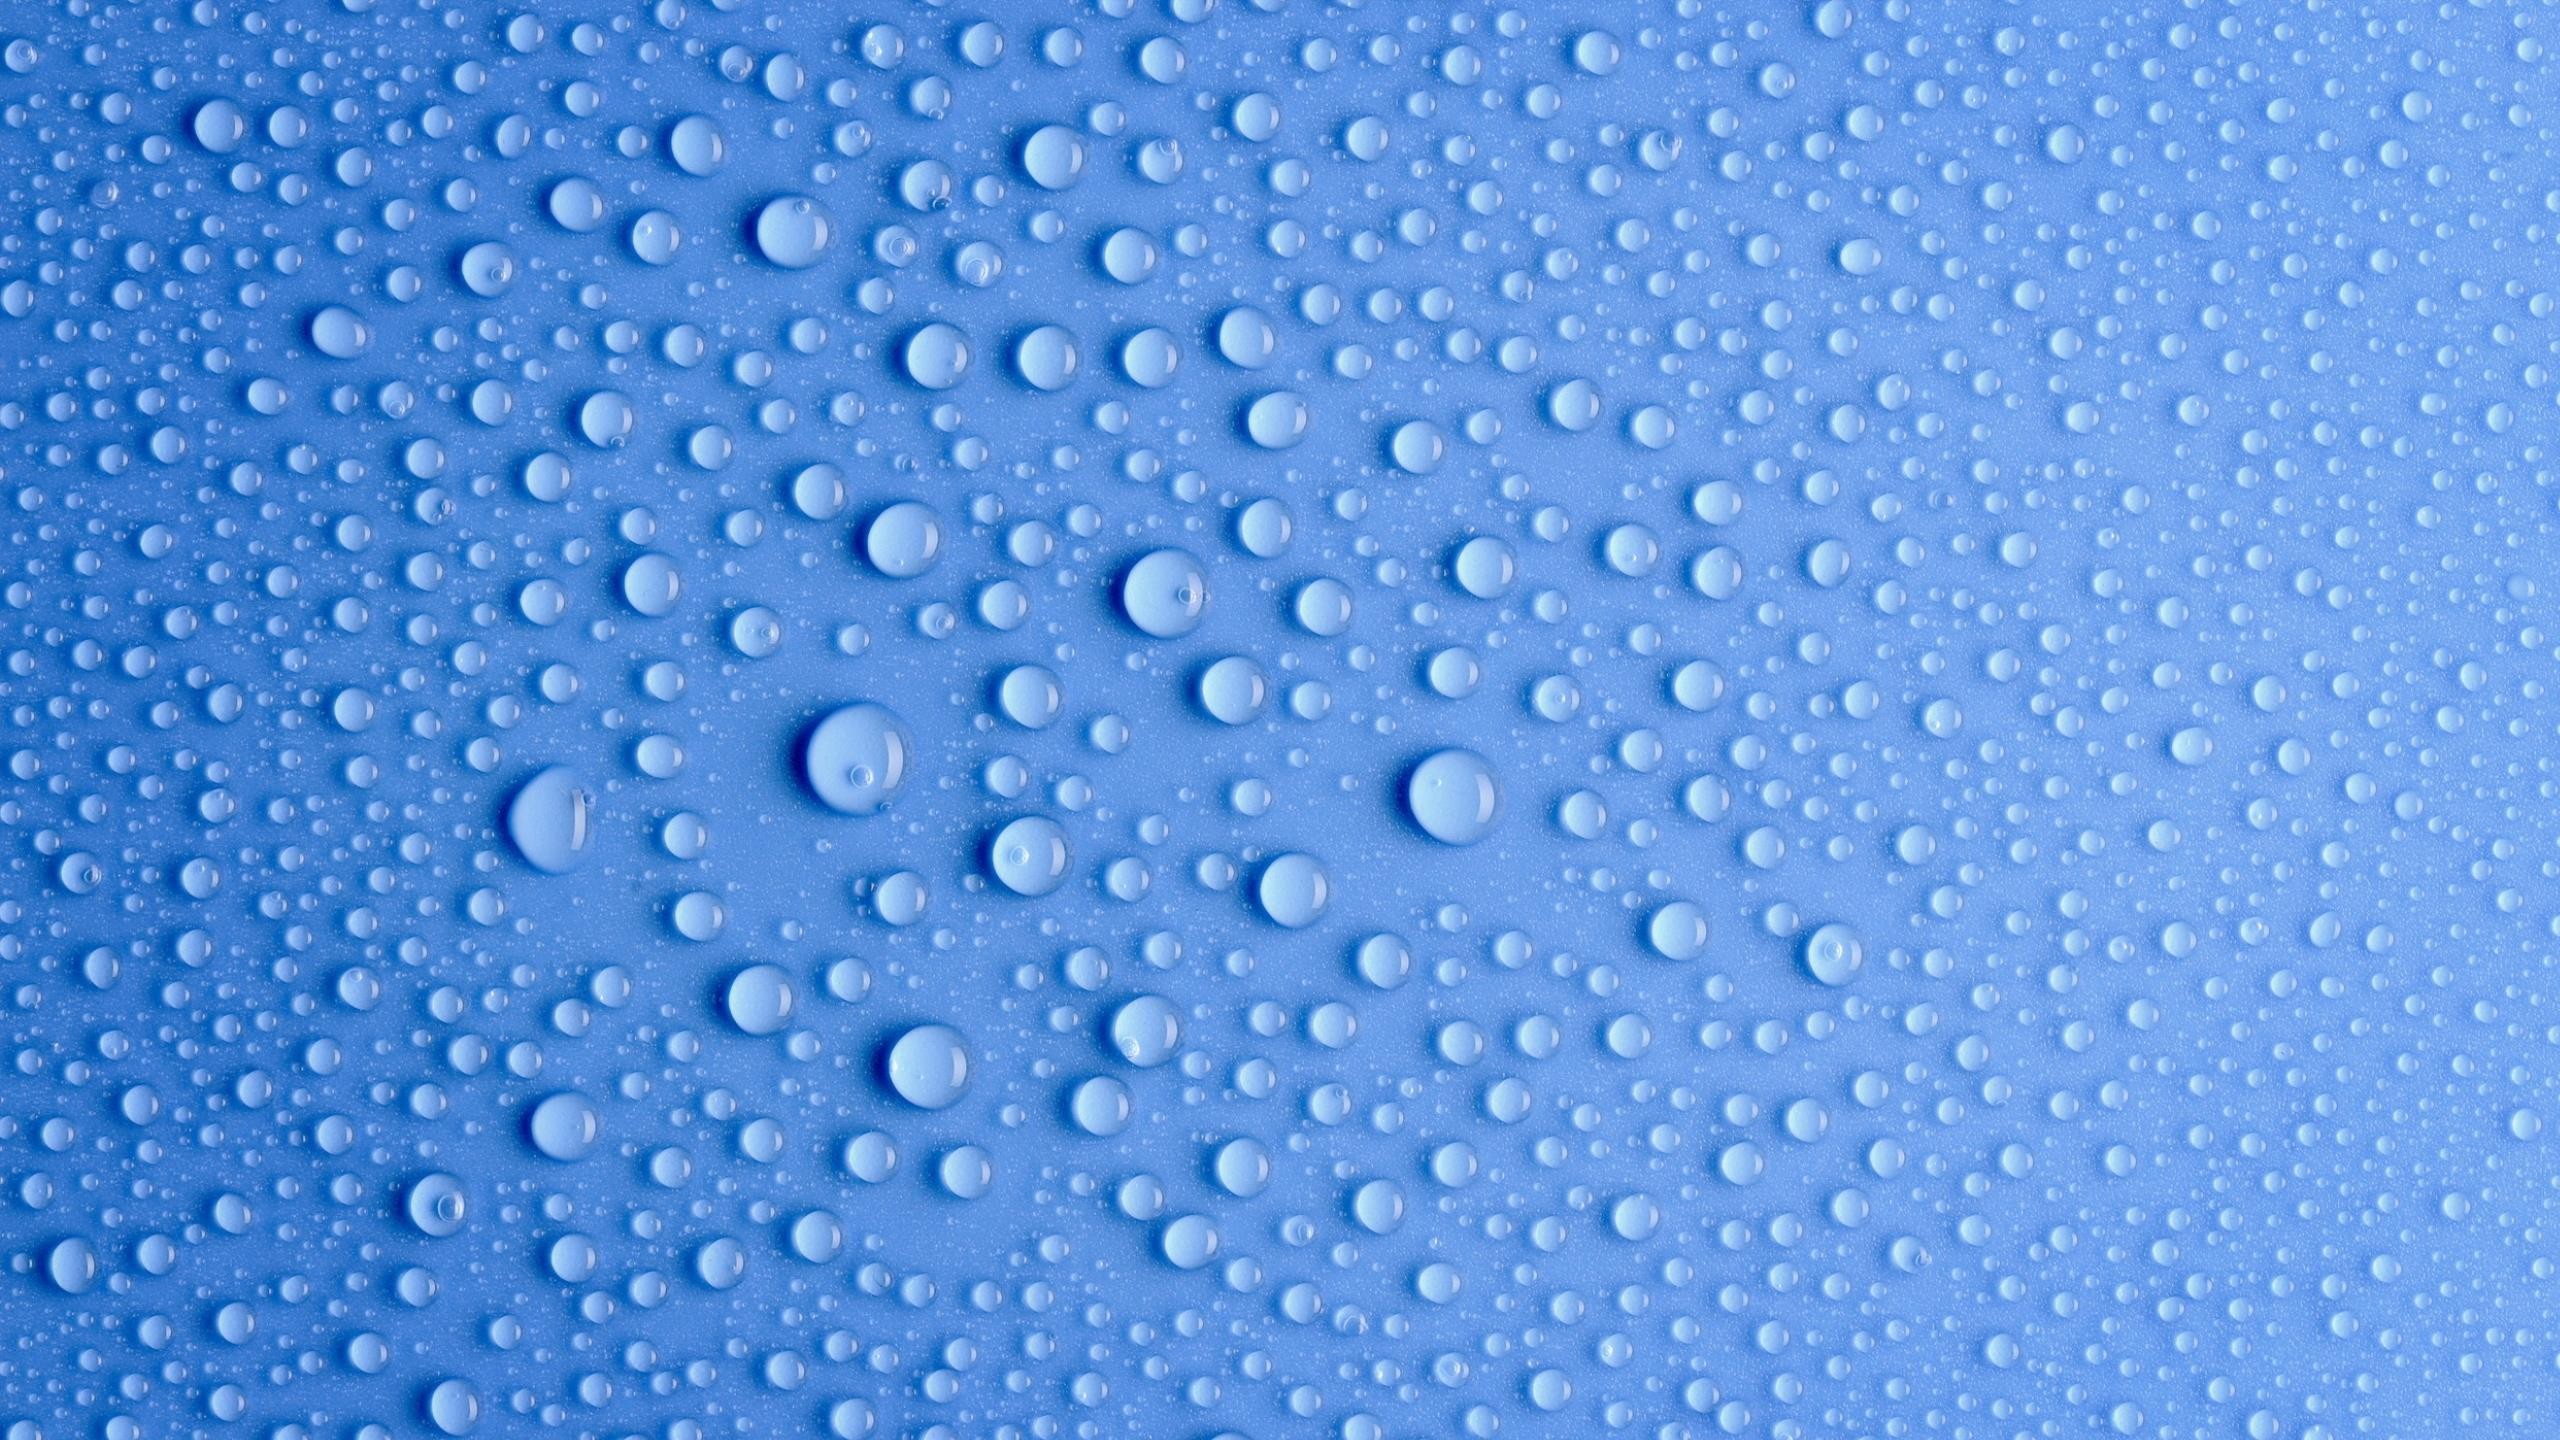 water drops, Blue background Wallpapers HD / Desktop and Mobile Backgrounds